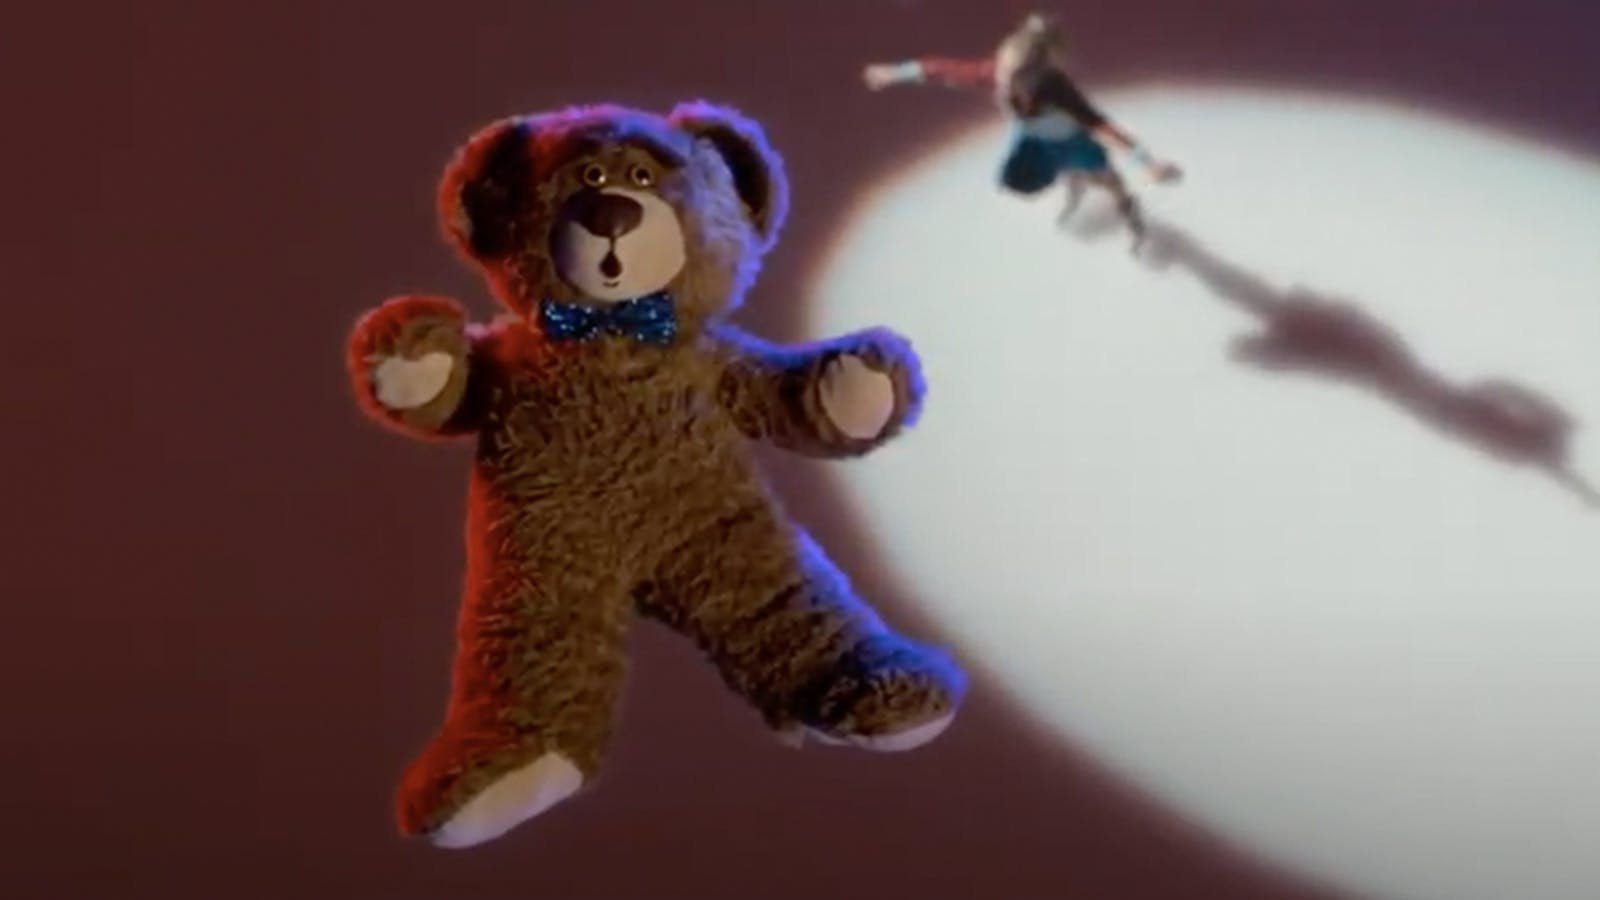 Screen grab of a teddy bear up in the air. A young girl can be seen in the distance. 